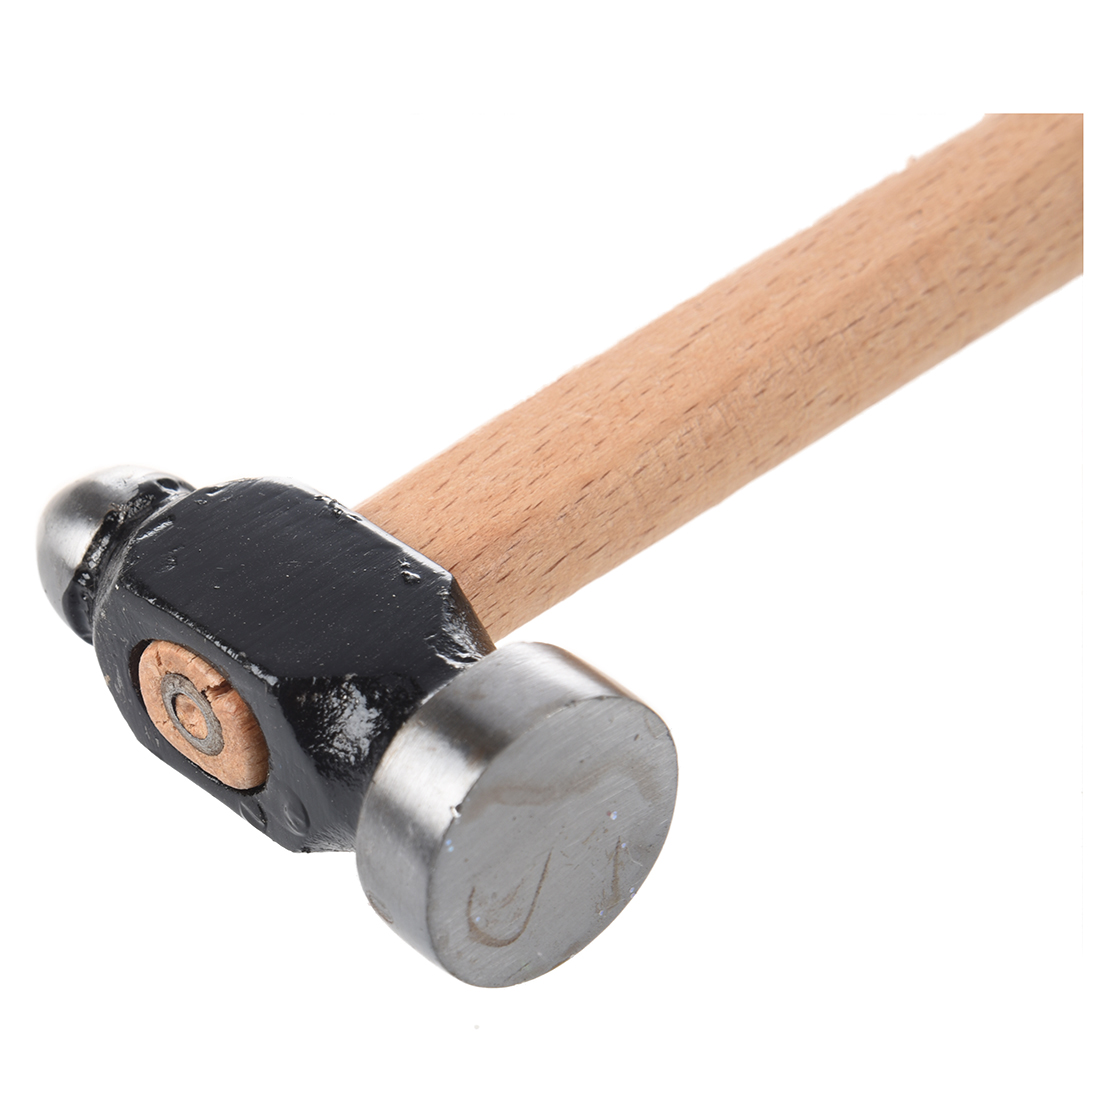 Planishing Chasing Hammer with Wooden Handle Jeweler / Goldsmith Tool Drop Shipping